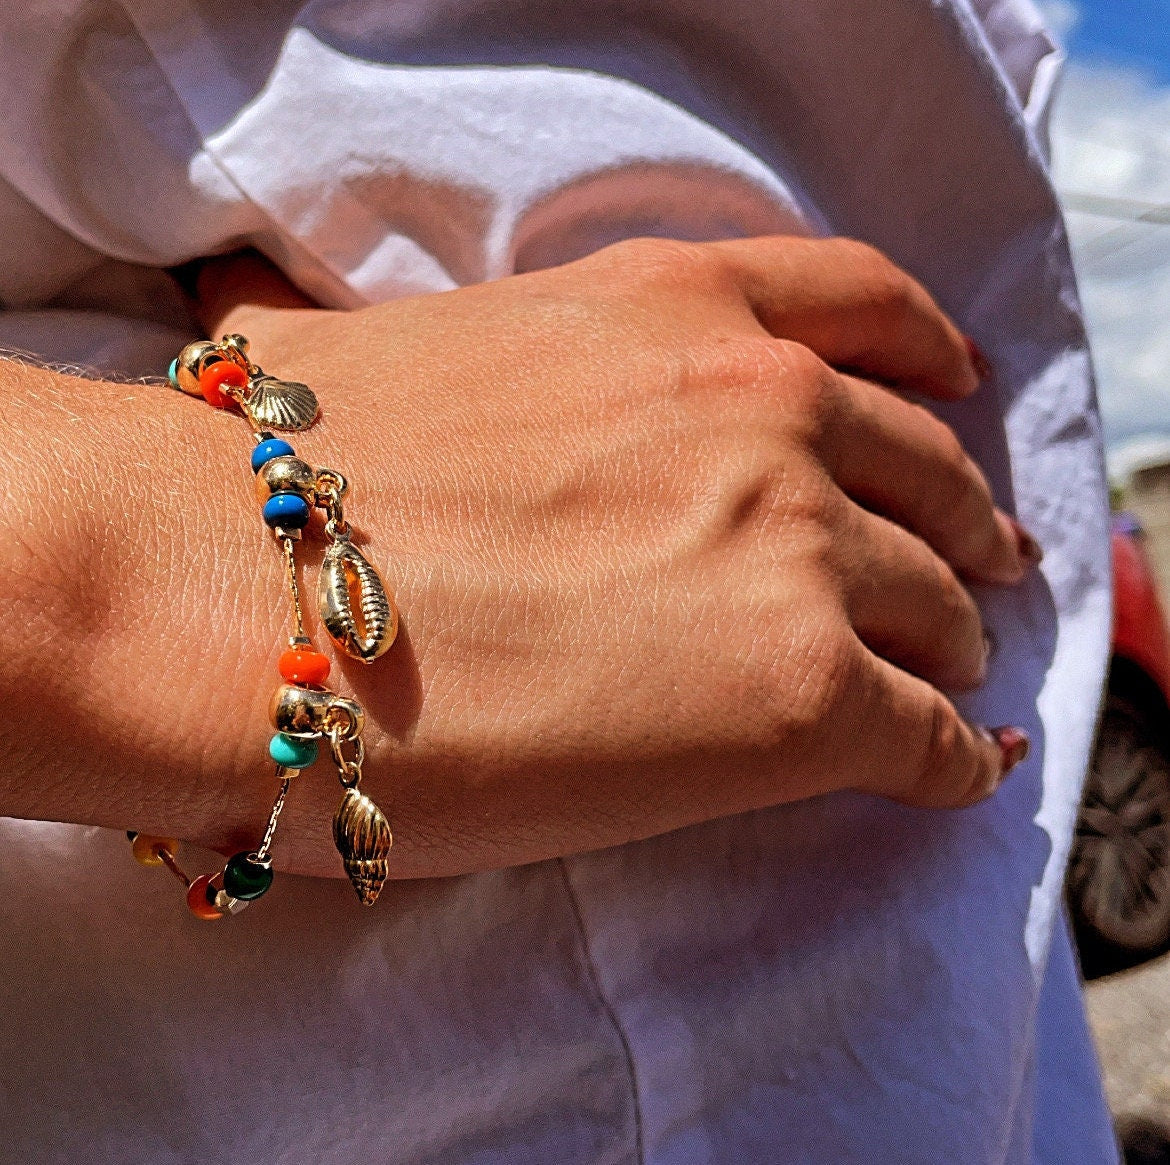 18k Gold Layered Colorful Bead Bracelet Featuring Ocean Cowrie Shell Charms,